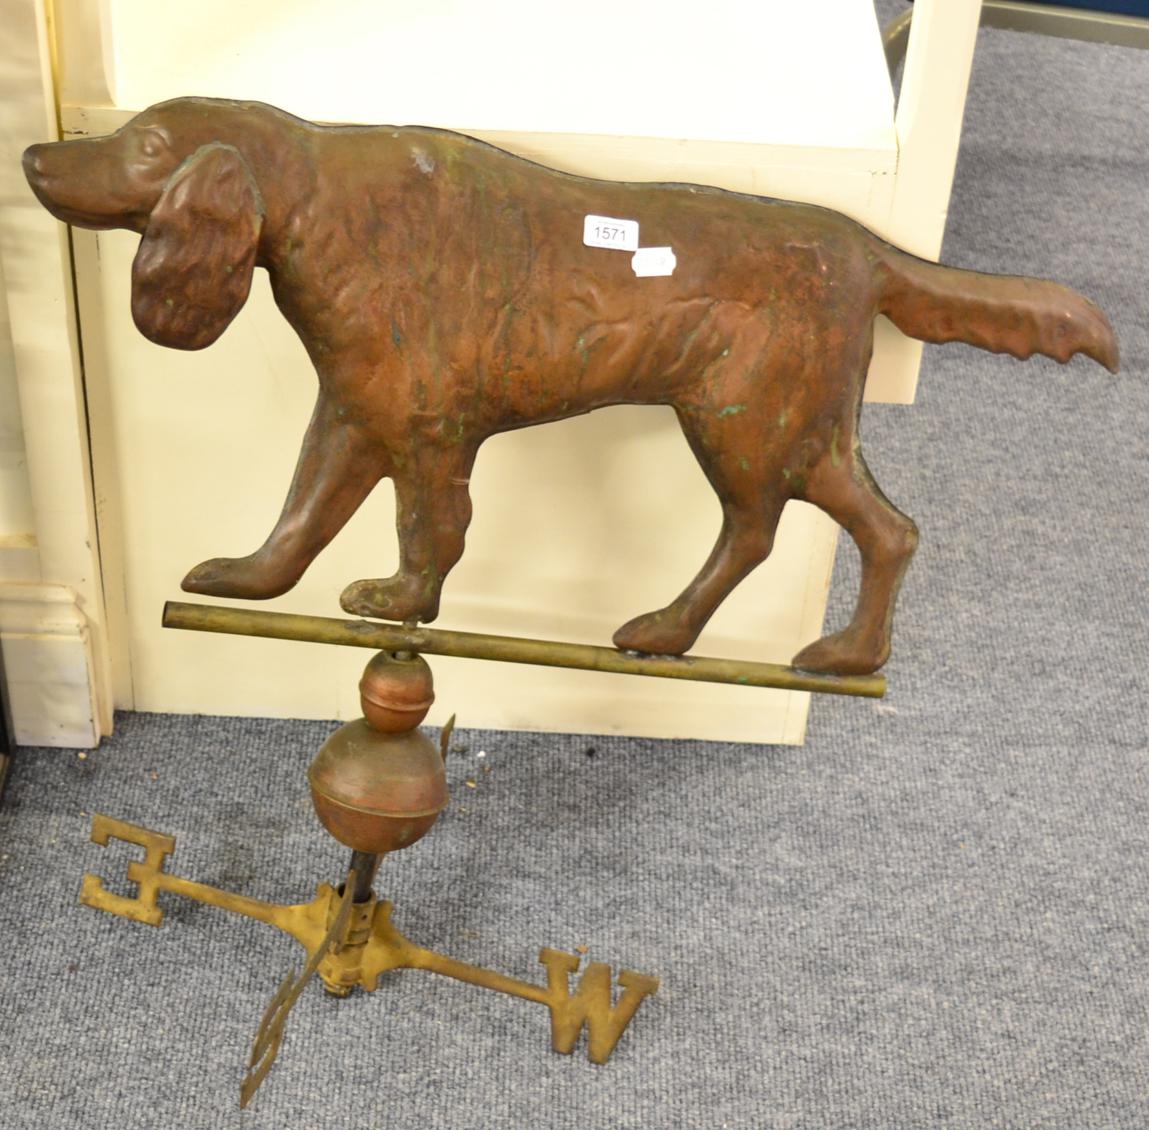 A weather vane in the form of a hunting dog